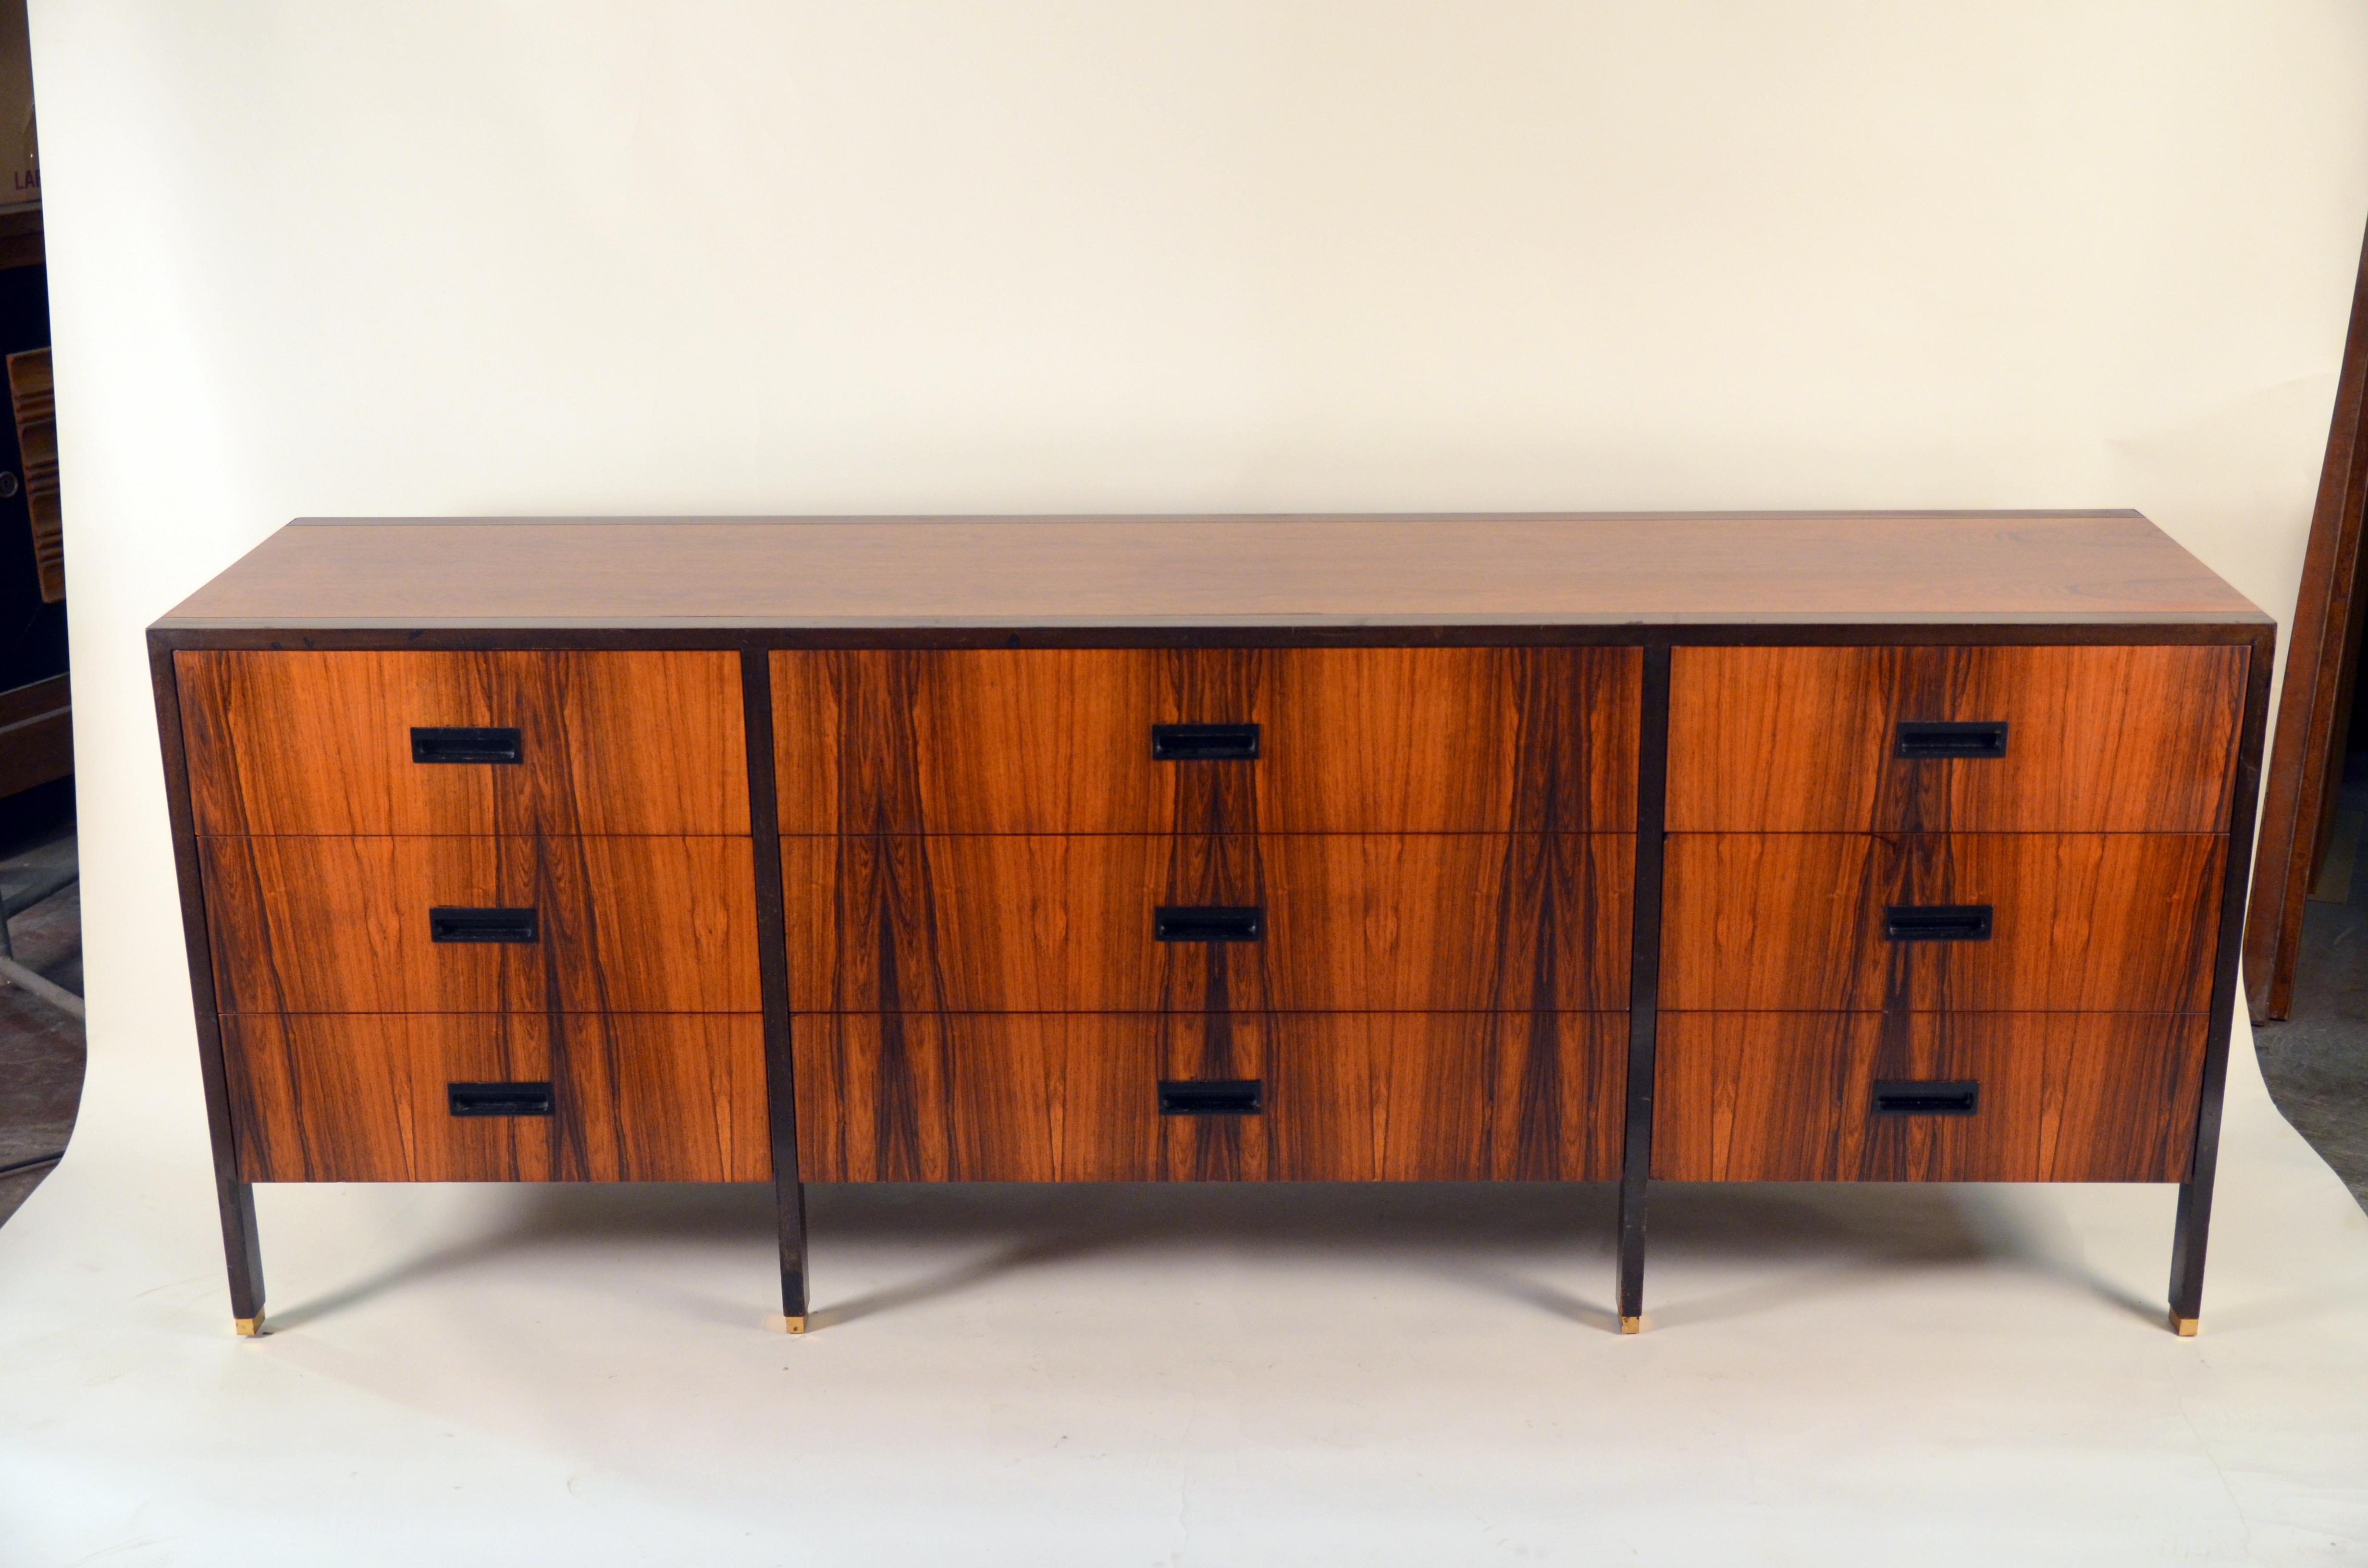 Exceptional Harvey Probber 9-drawer dresser in rosewood and ebonized mahogany with brass feet.

Harvey Probber (1922-2003), a design autodidact in a profession largely dominated by formal architectural training, began his creative career at age 16